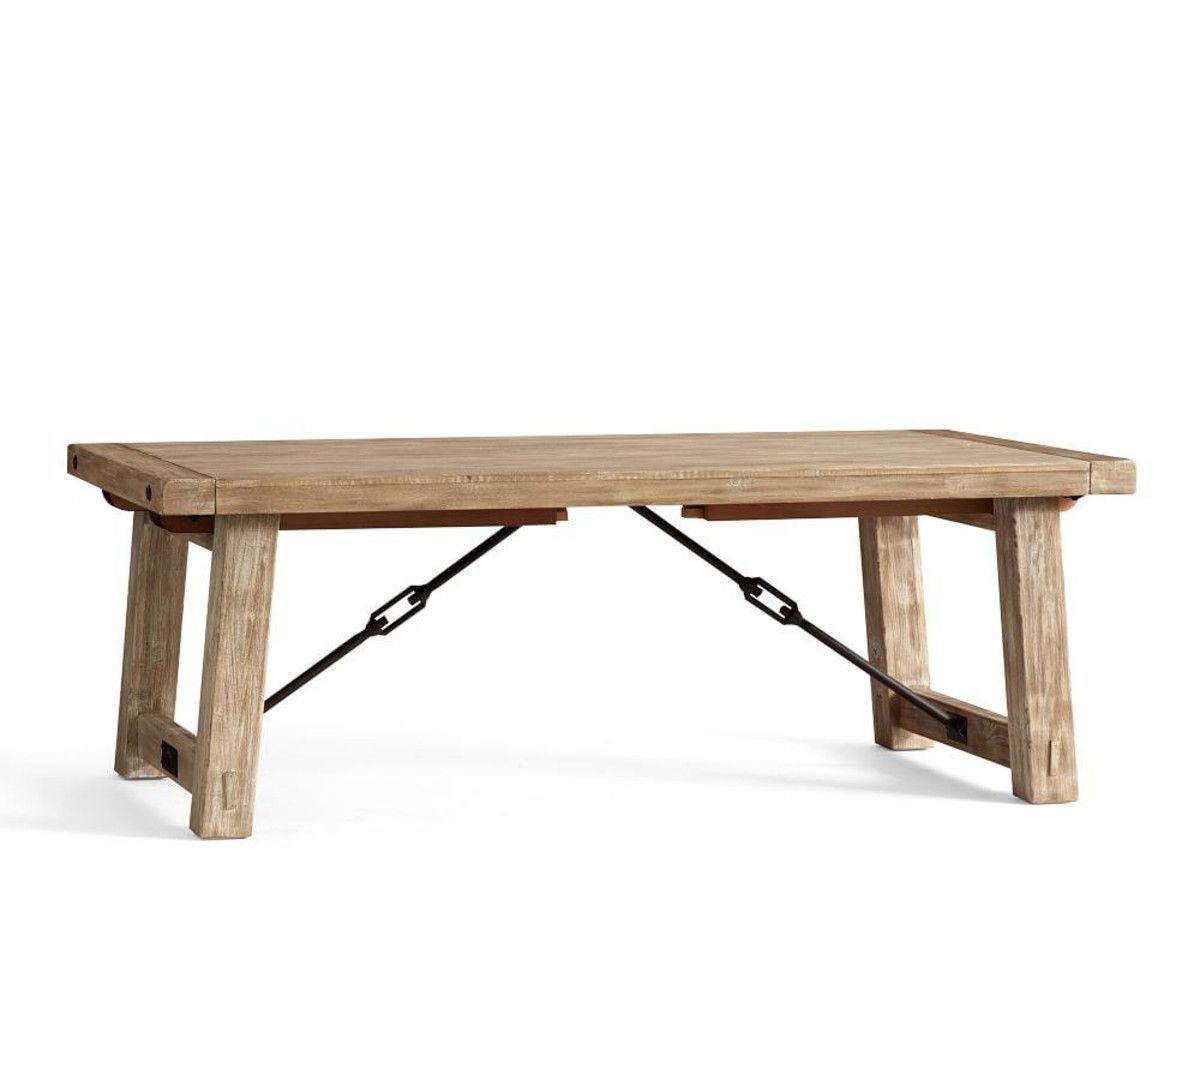 Benchwright Extending Dining Table, Seadrift | Kitchen Love Regarding Most Recently Released Gray Wash Toscana Extending Dining Tables (View 10 of 25)